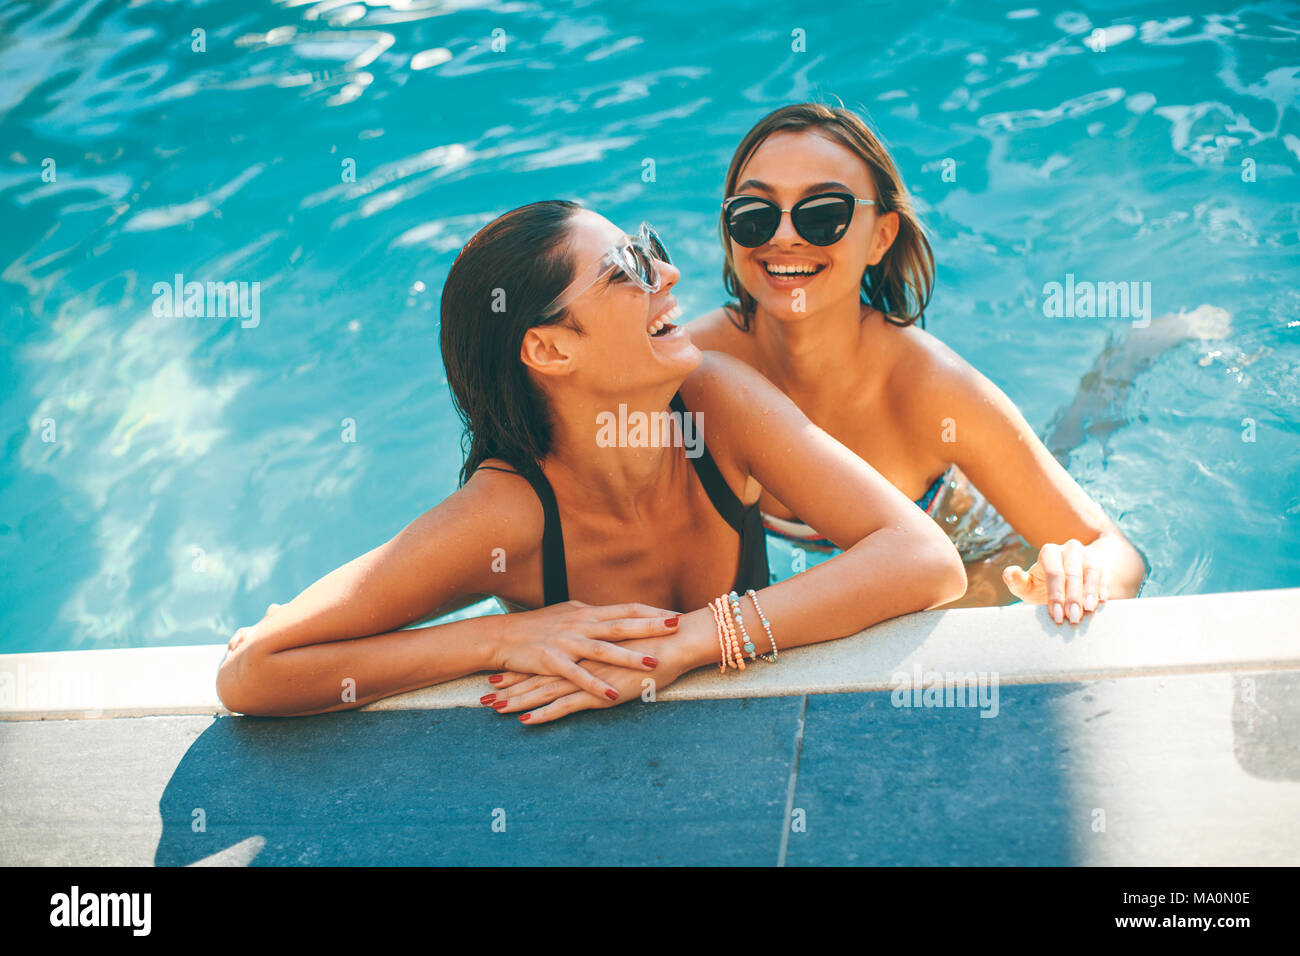 Young women having fun by the pool at hot summer day Stock Photo